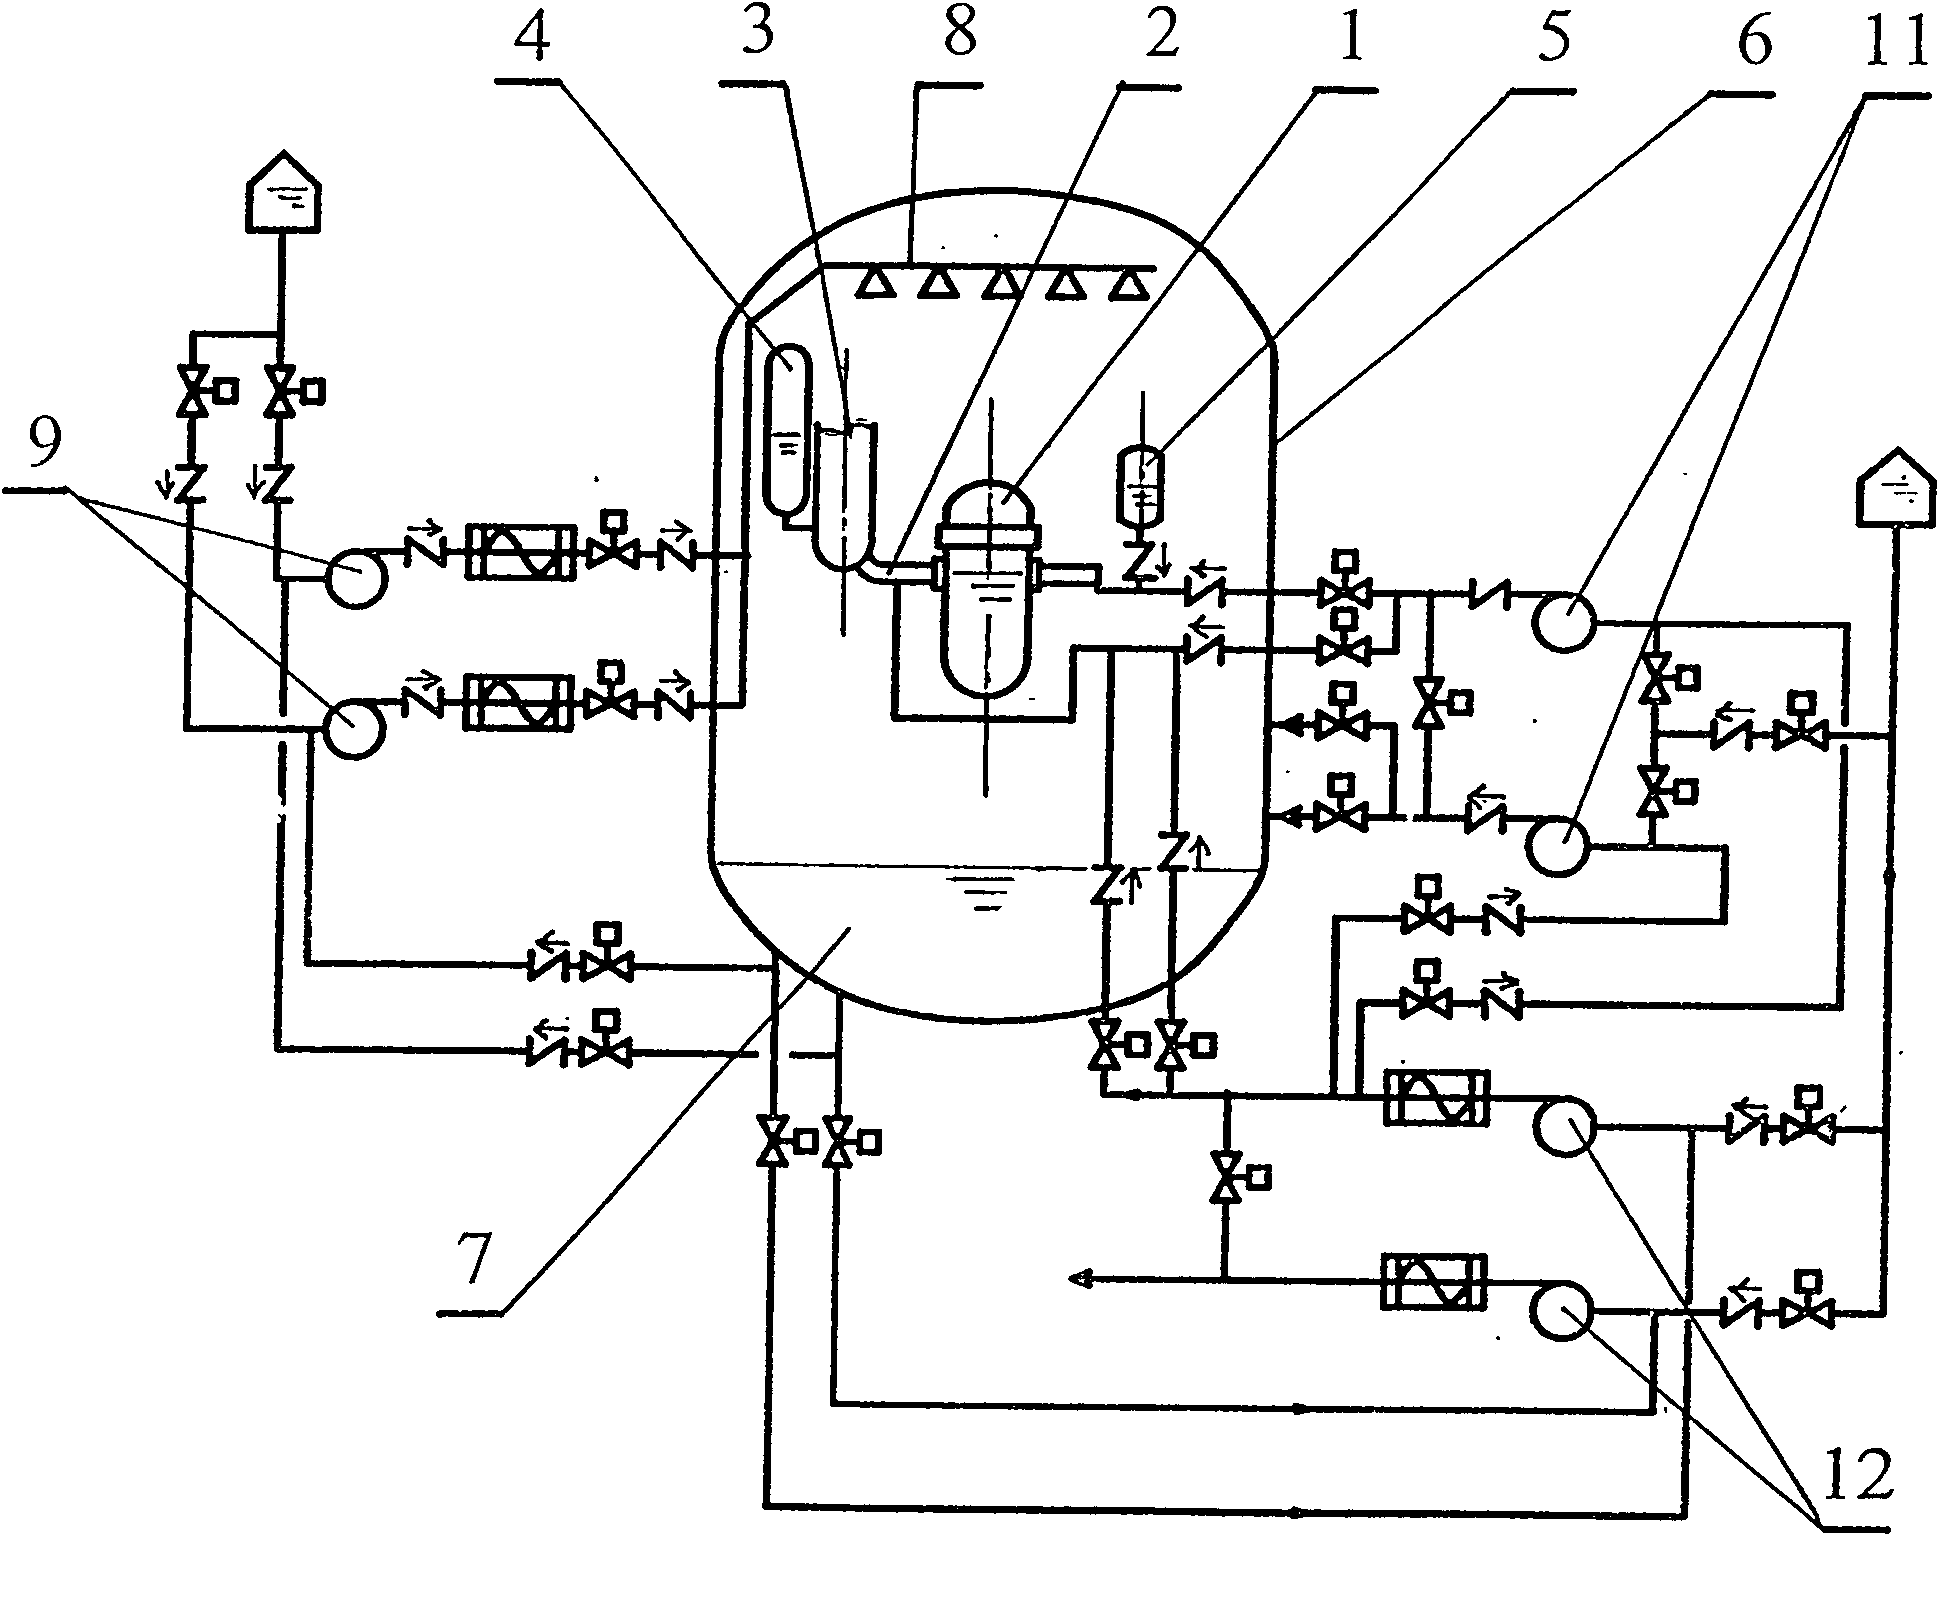 Passive emergency cooling system for severe accident in reactor